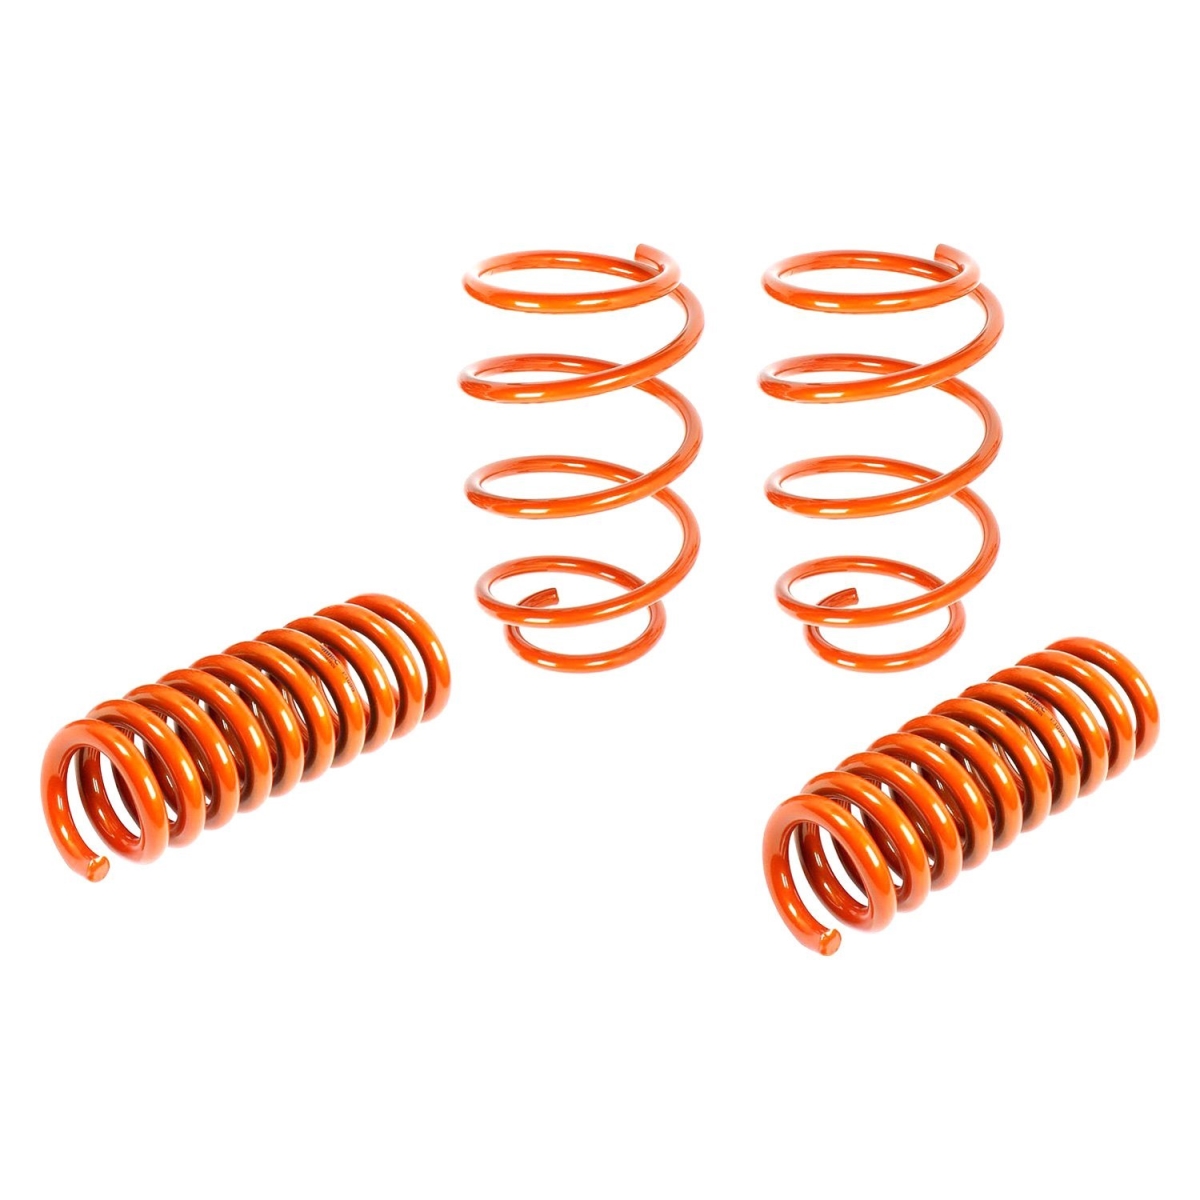 Picture of AFE 410-402002-N Control Lowering Springs for 2016 Chevy Camaro 6.2L V8